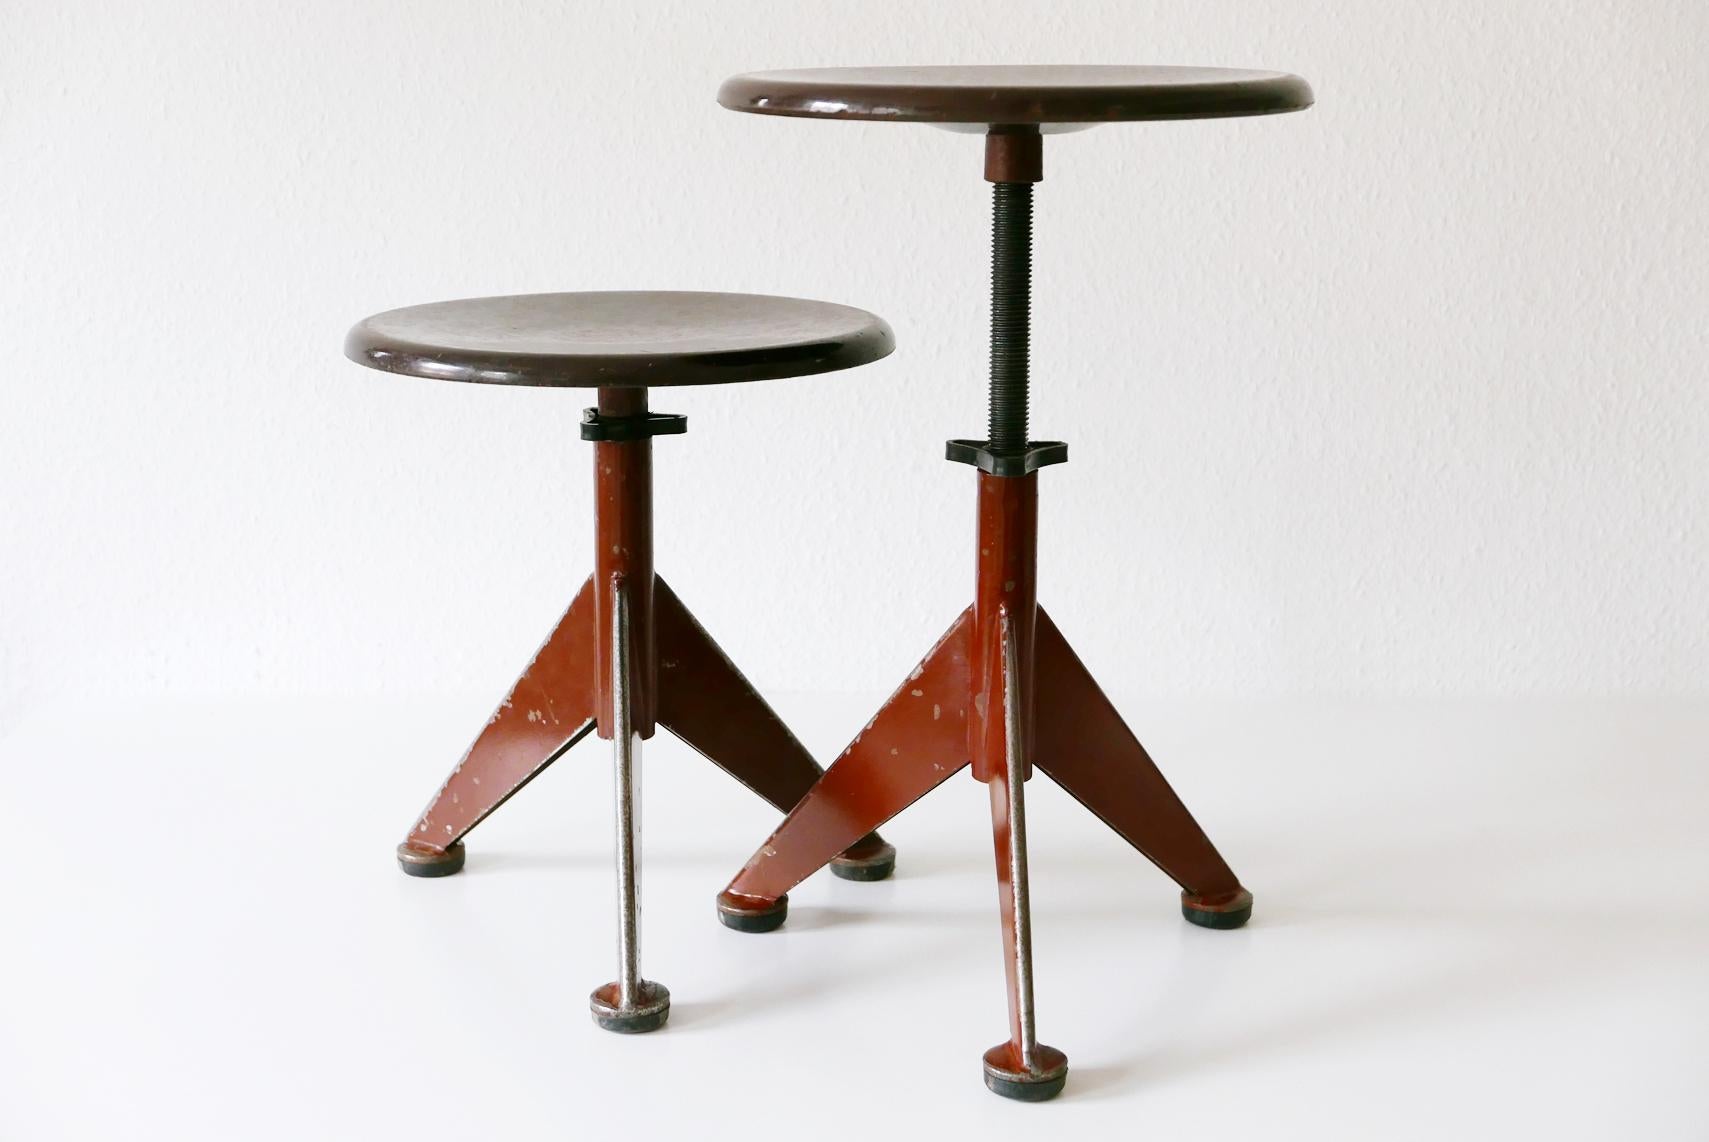 Set of two extremely rare industrial workshop stools. Manufactured by AB Odelberg Olsen, 1930s, Sweden.

Executed in Bakelite seat and enameled steel base.

Dimensions:
Dm 13 in. x H 18 in. or Dm 33 cm x H 45 cm
The sitting height can be